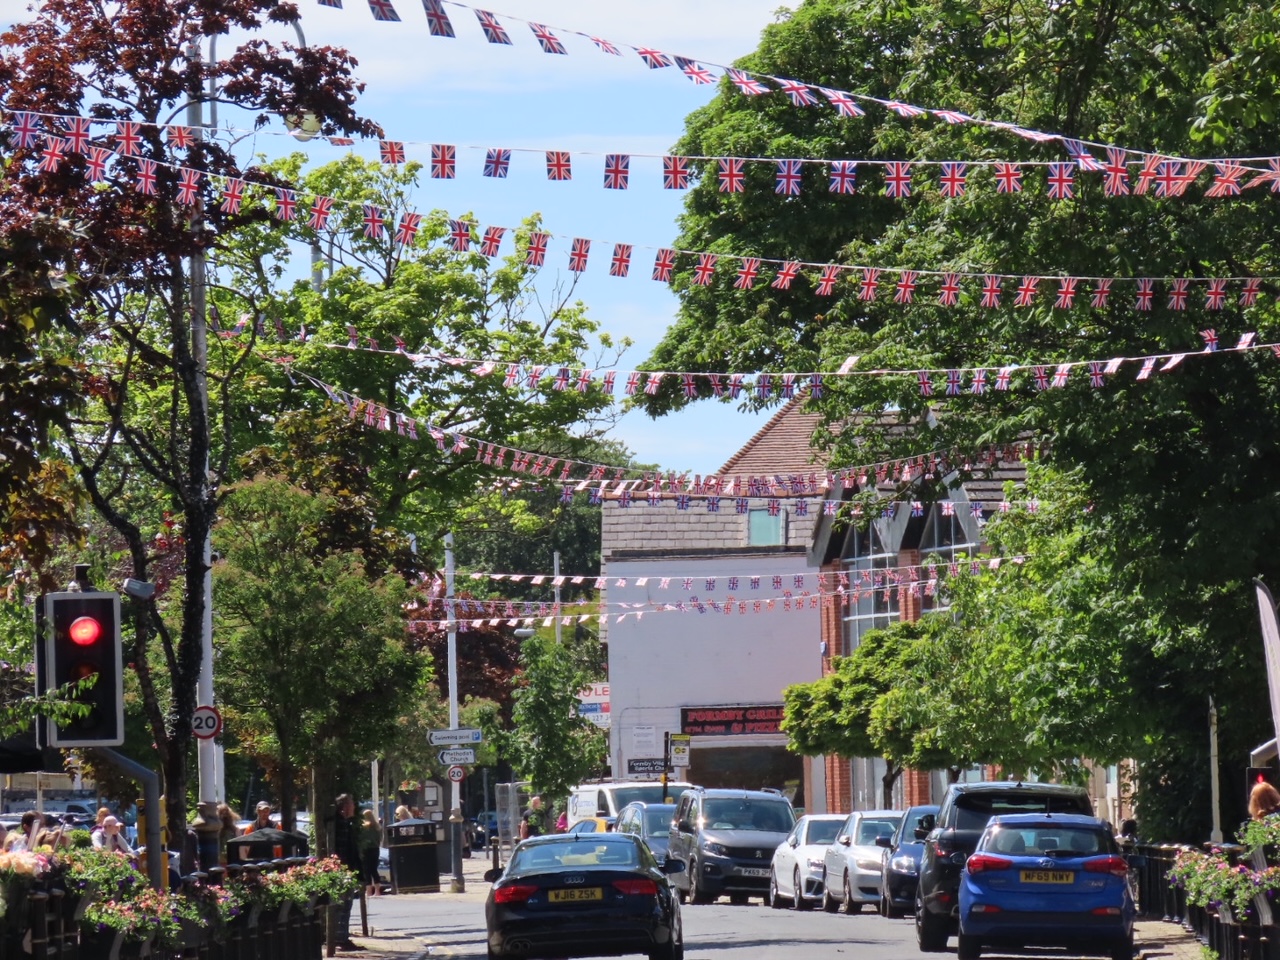 Formby Village has been decorated with hundreds of metres of bunting to celebrate The Queens Platinum Jubilee by IllumiDex UK Ltd. Photo by Andrew Brown Media